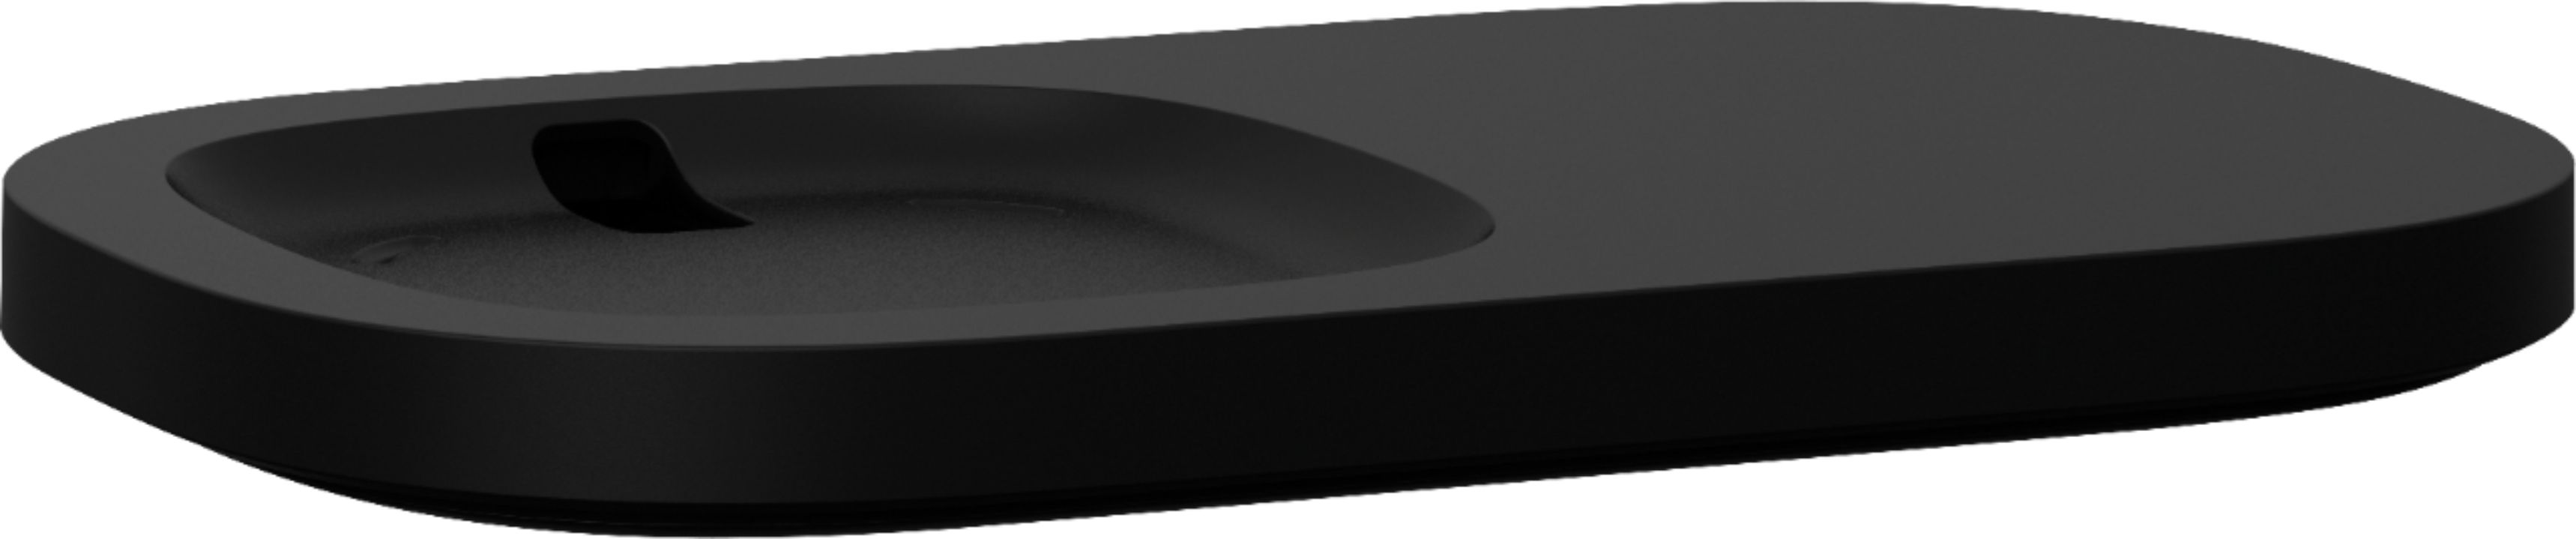 Angle View: Sonos - Roam Wireless Charger - Black